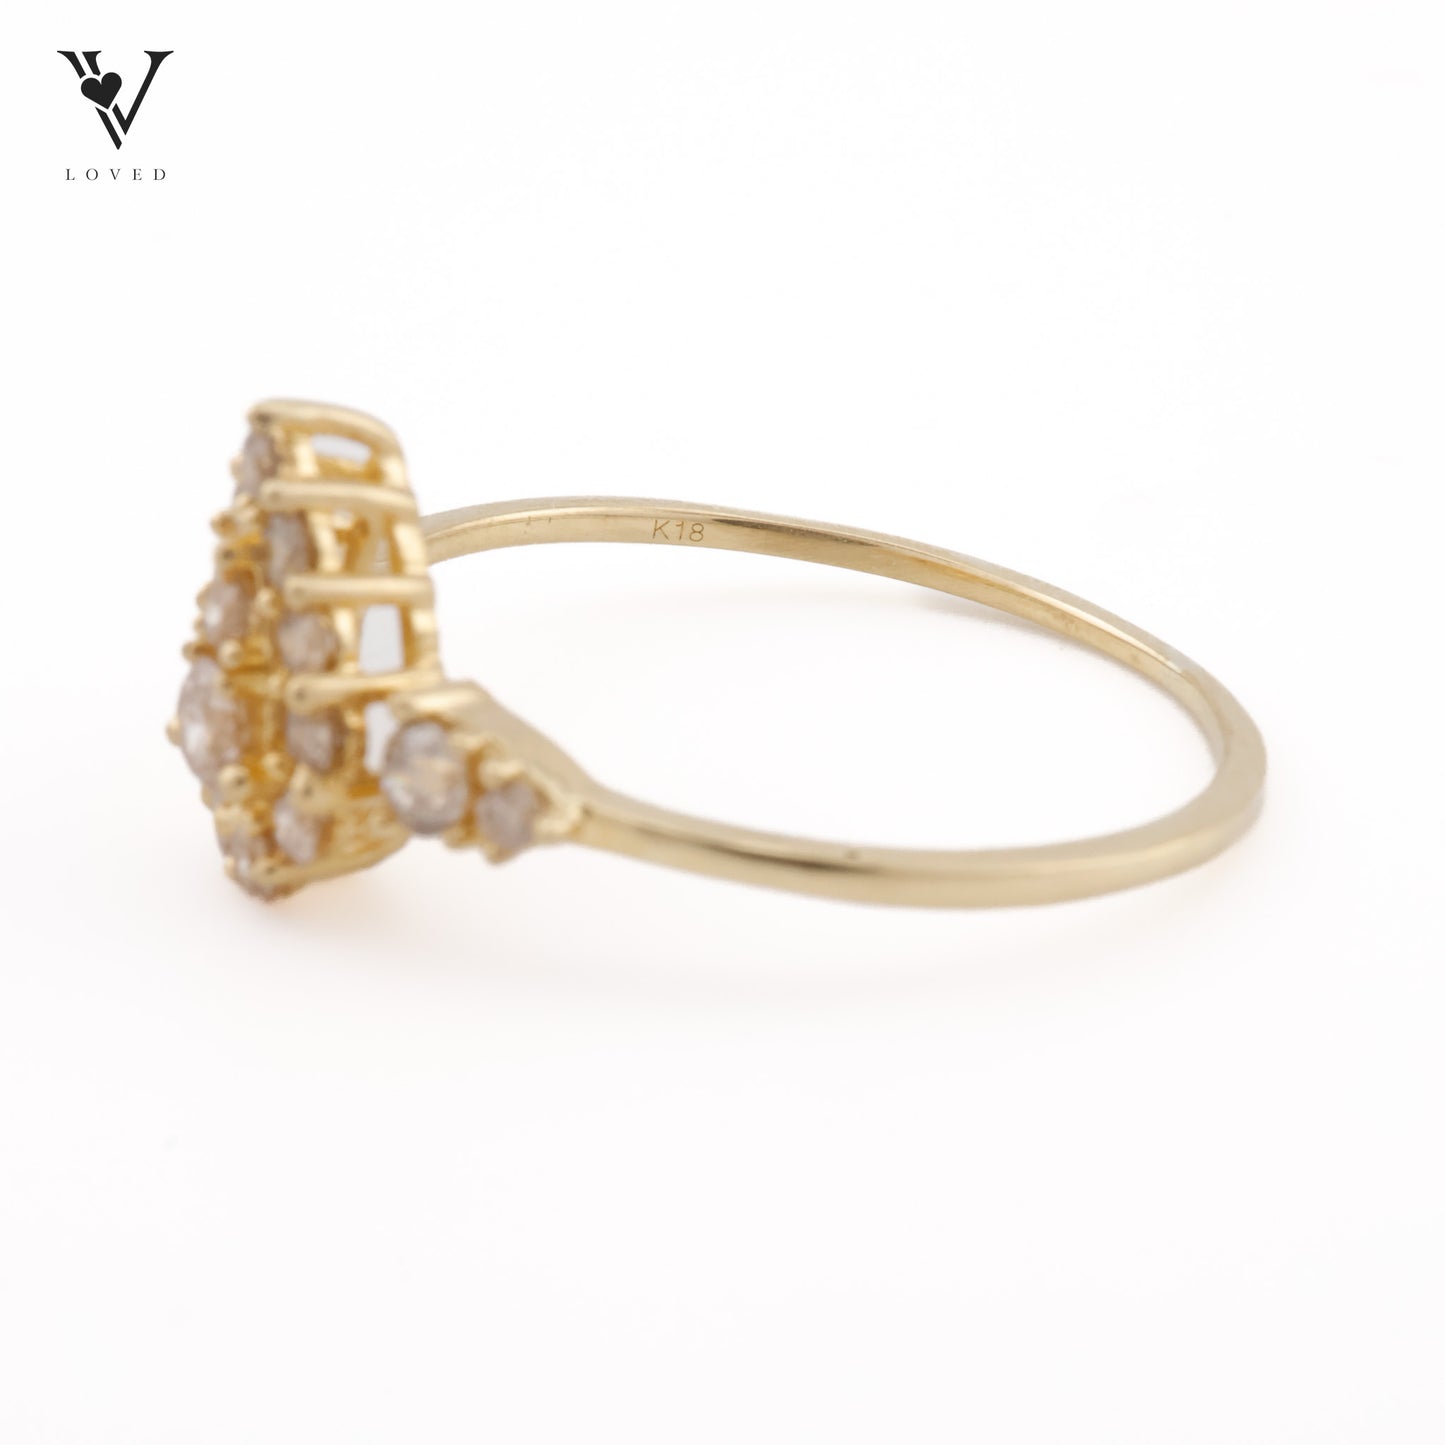 Celestial Pear Ring in Yellow Gold